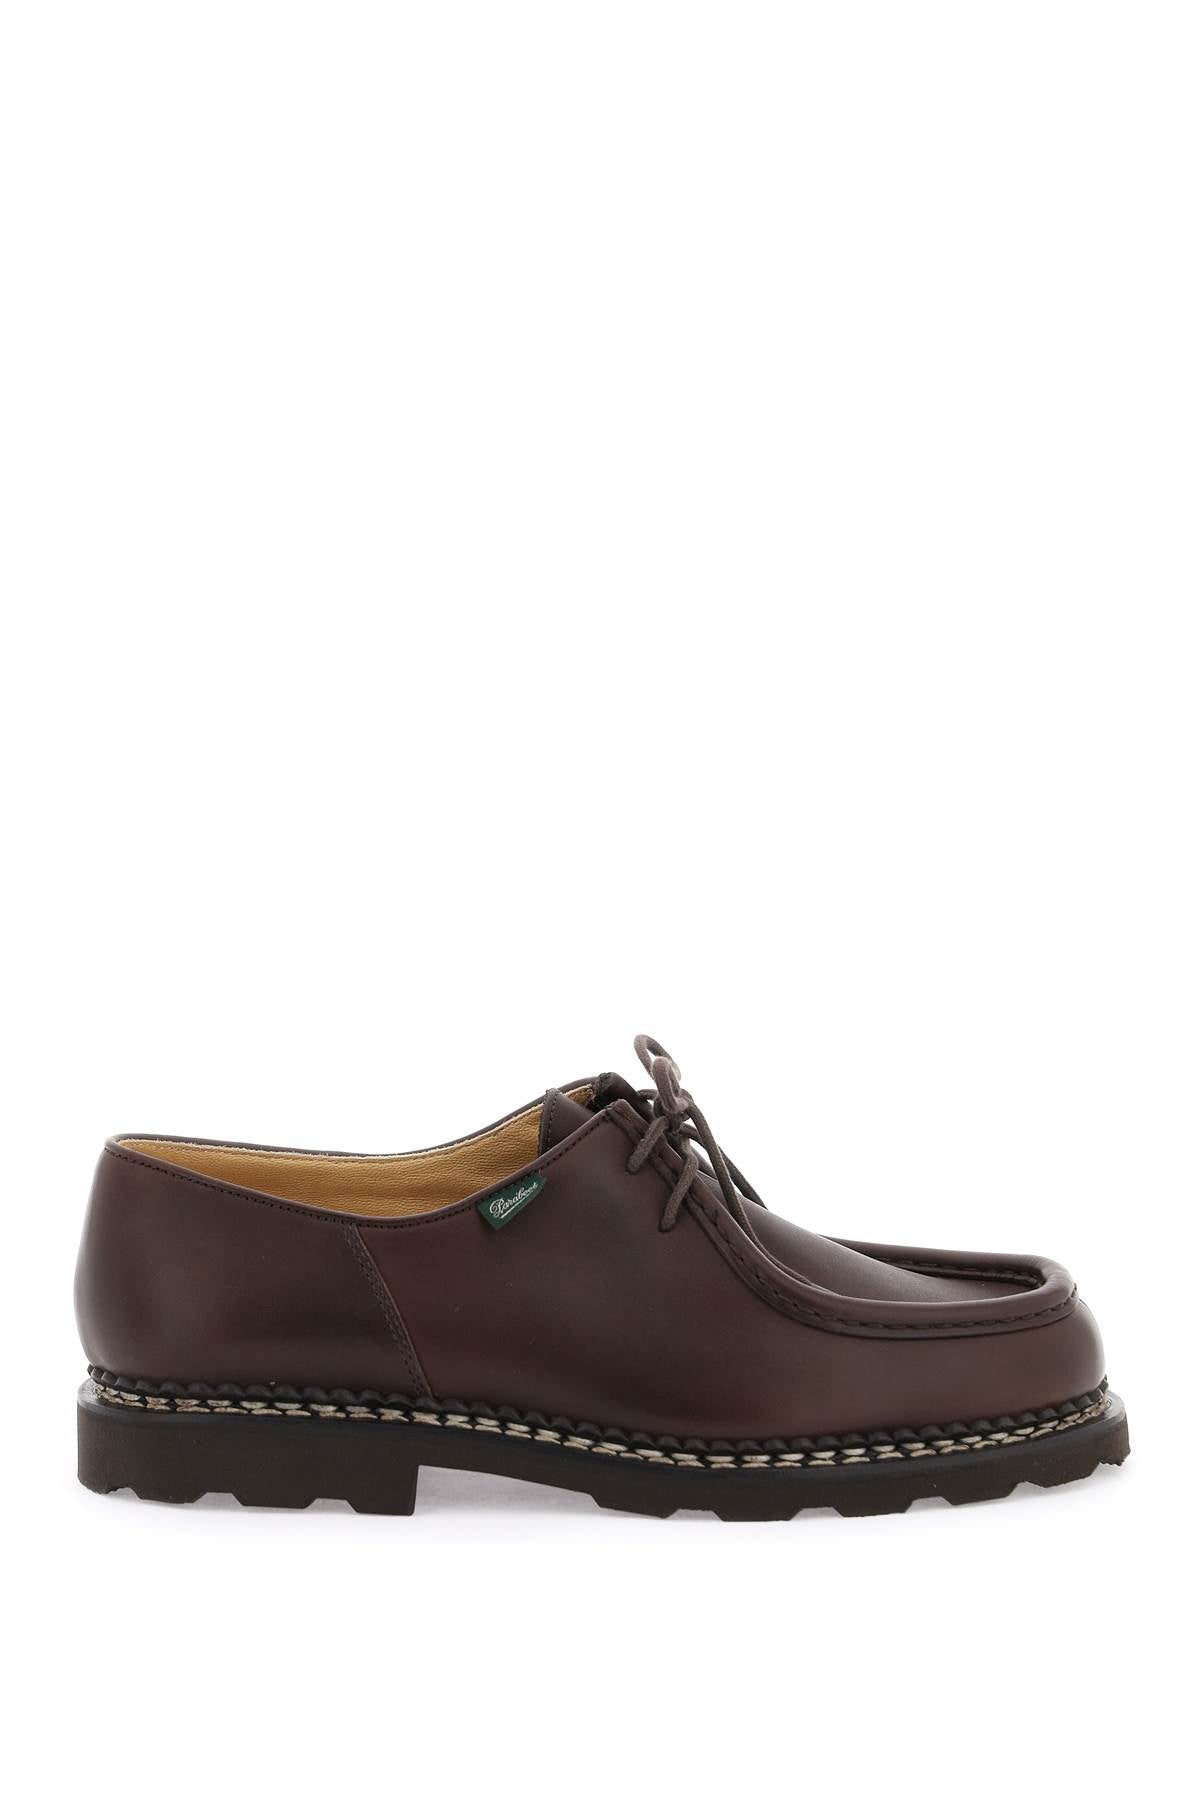 Paraboot Paraboot leather michael derby shoes